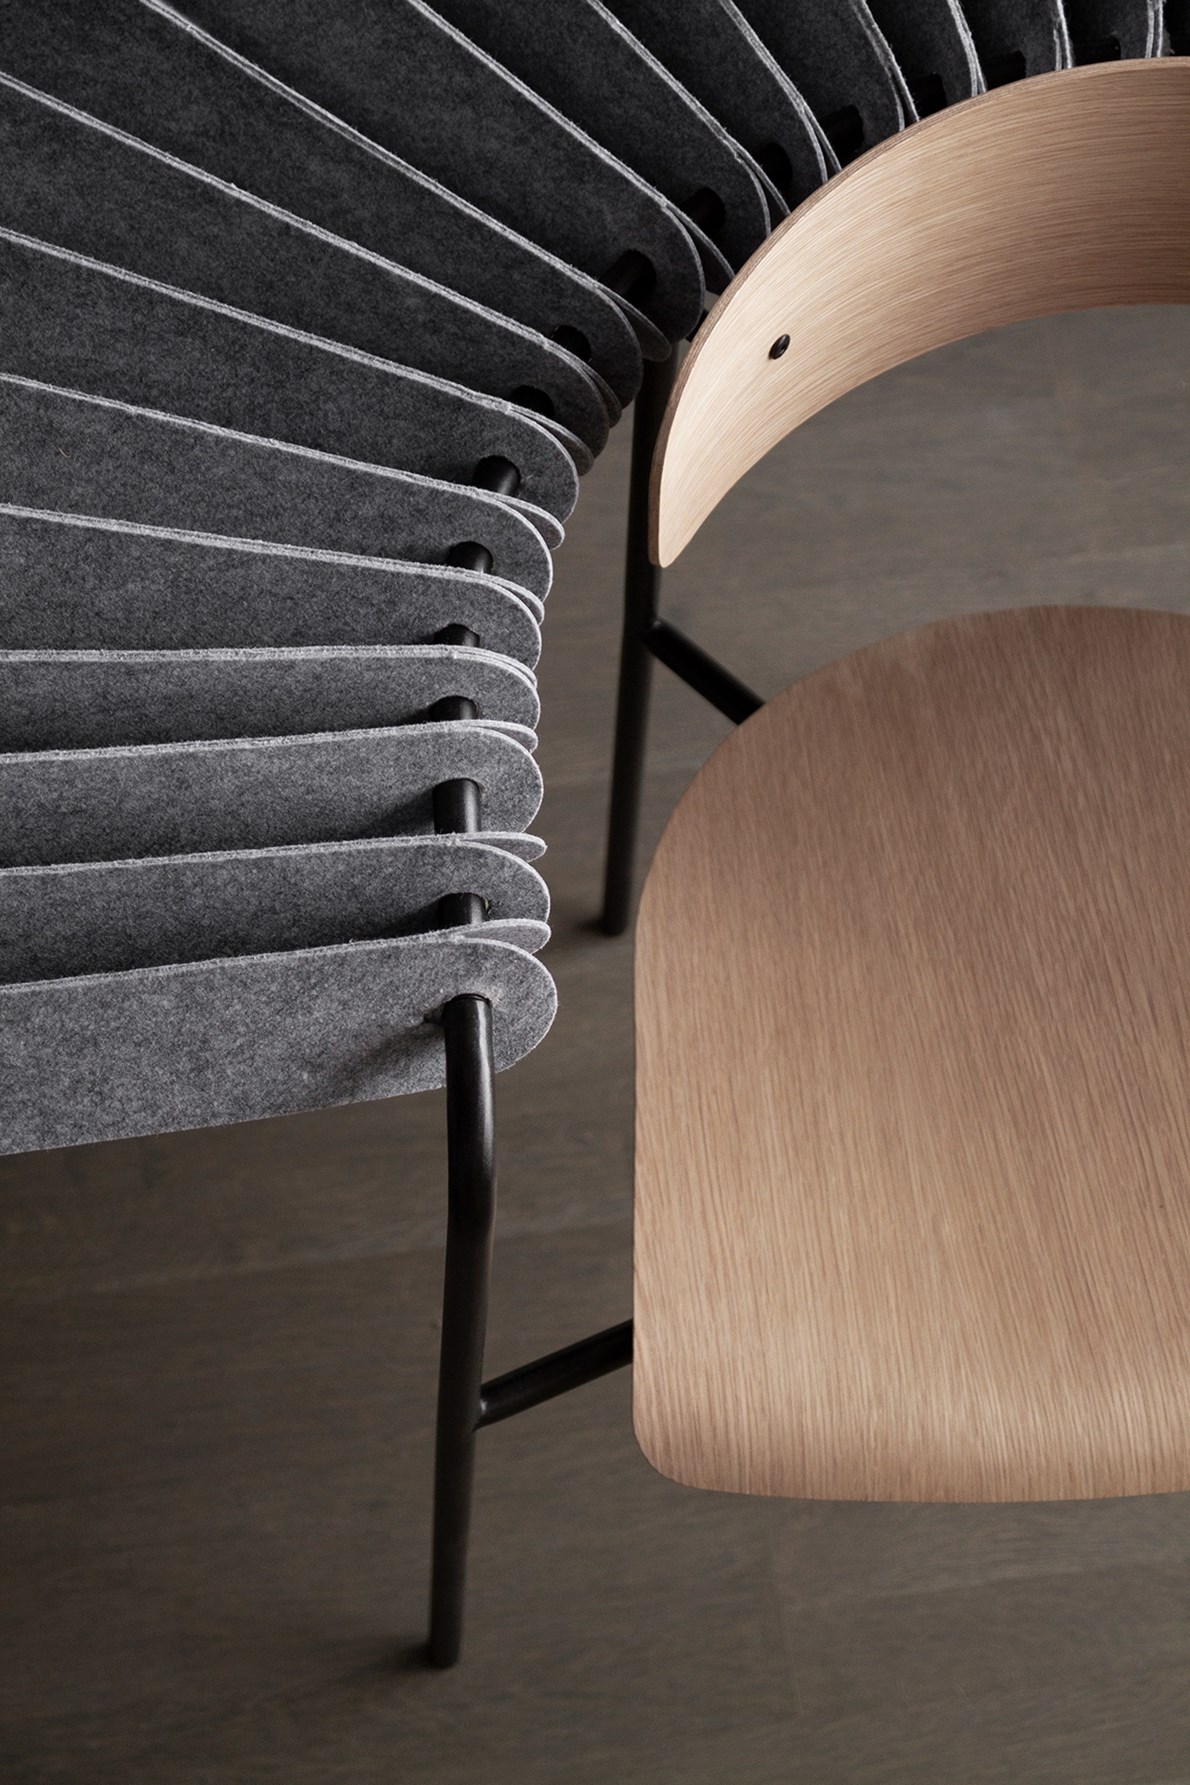 Peacock Chair: A Design Solution for the New Normal of Working from Home